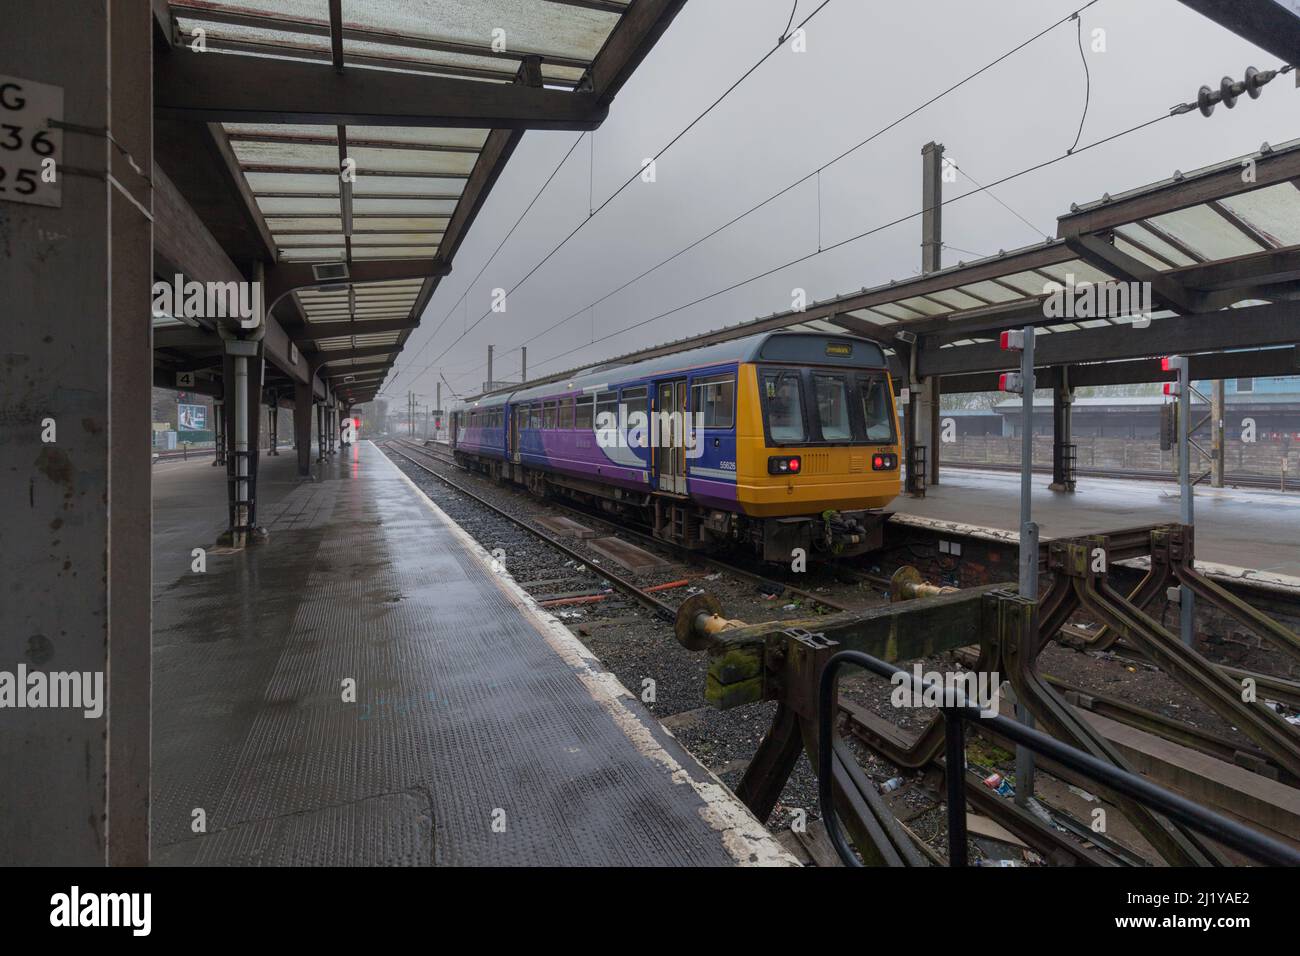 Northern rail class 142 pacer train 142035 at Preston  railway station south bay with the buffer stops made from old rails with red tail lights Stock Photo